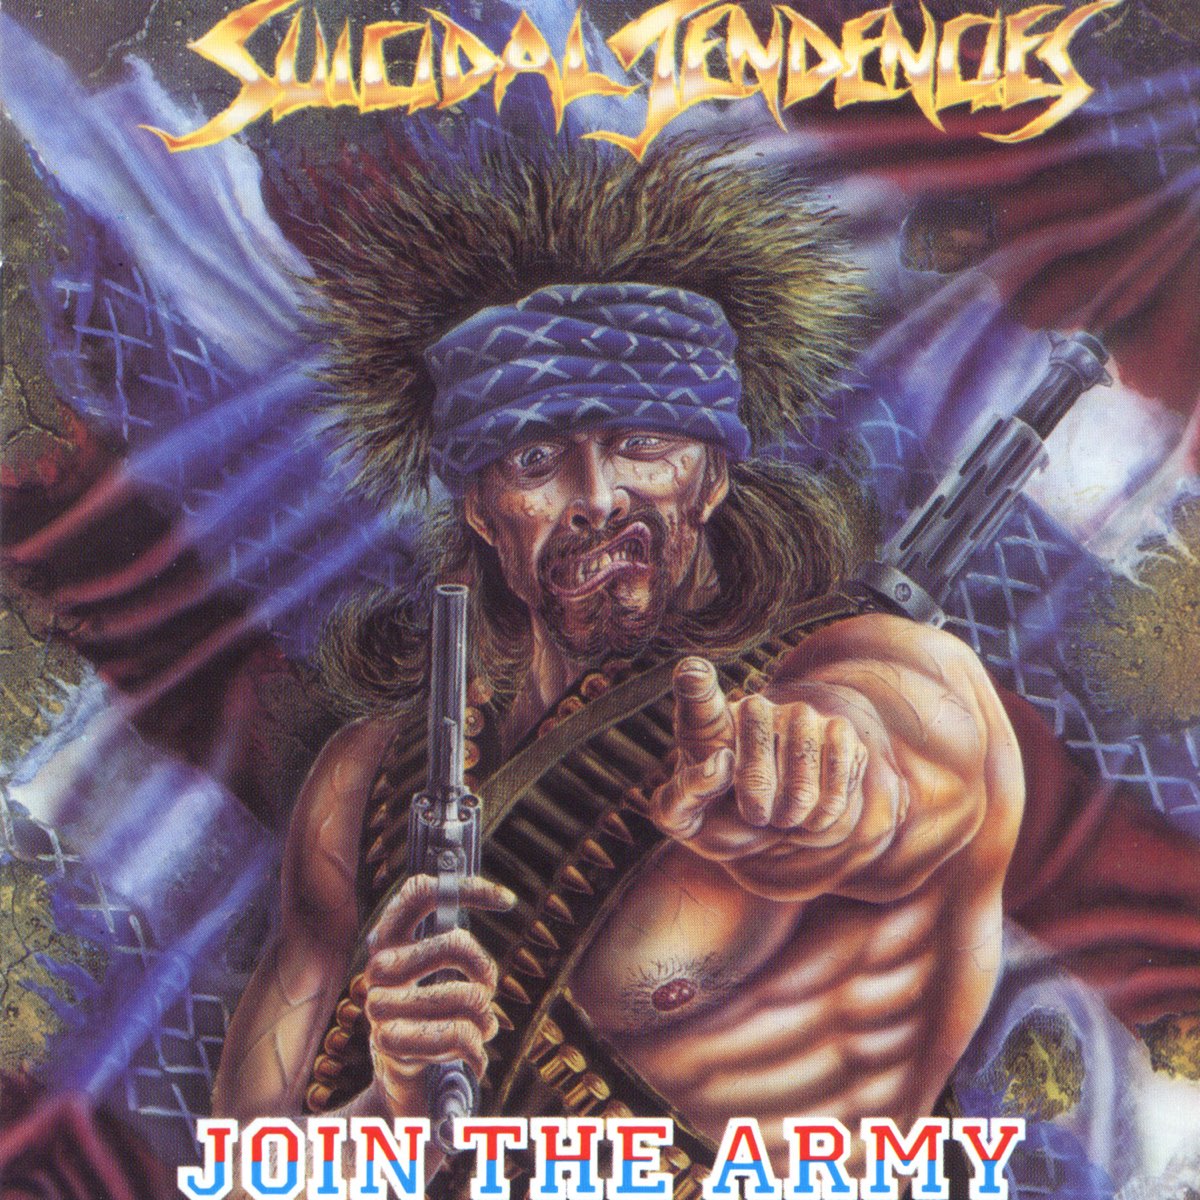 ‎Join the Army - Album by Suicidal Tendencies - Apple Music